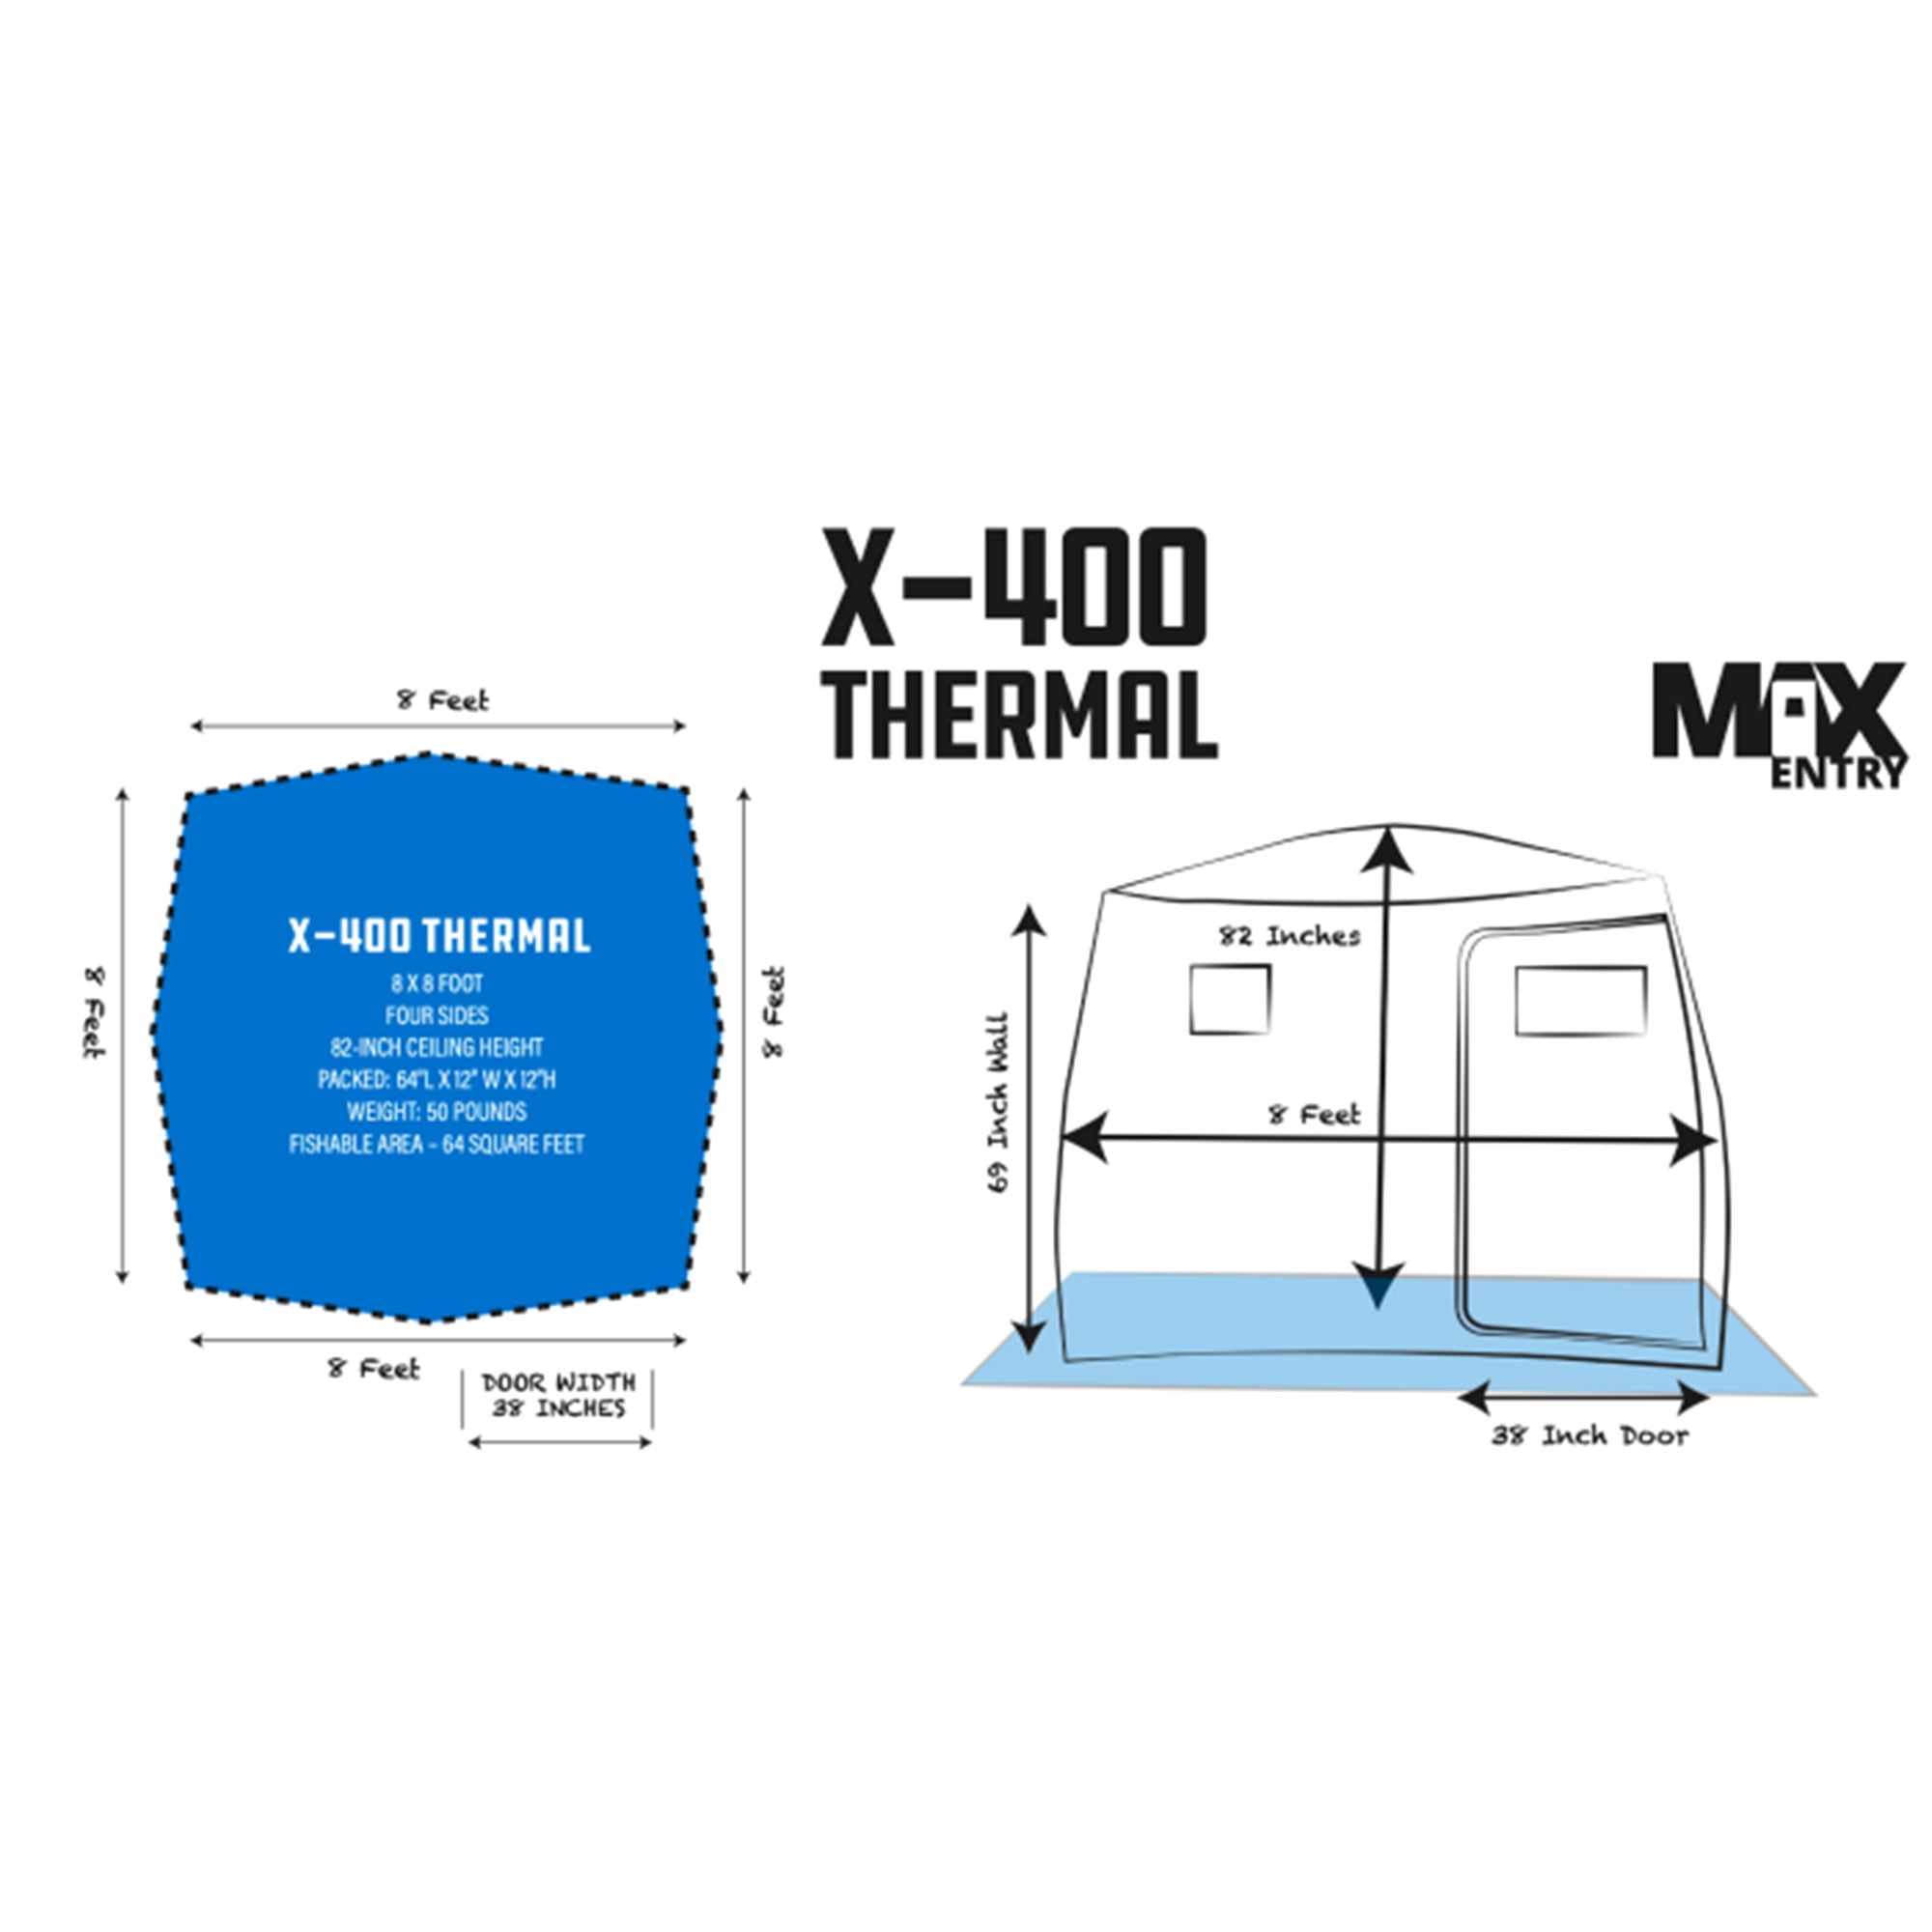 Clam X400 Thermal XT - Marine General - Clam Ice Shelters